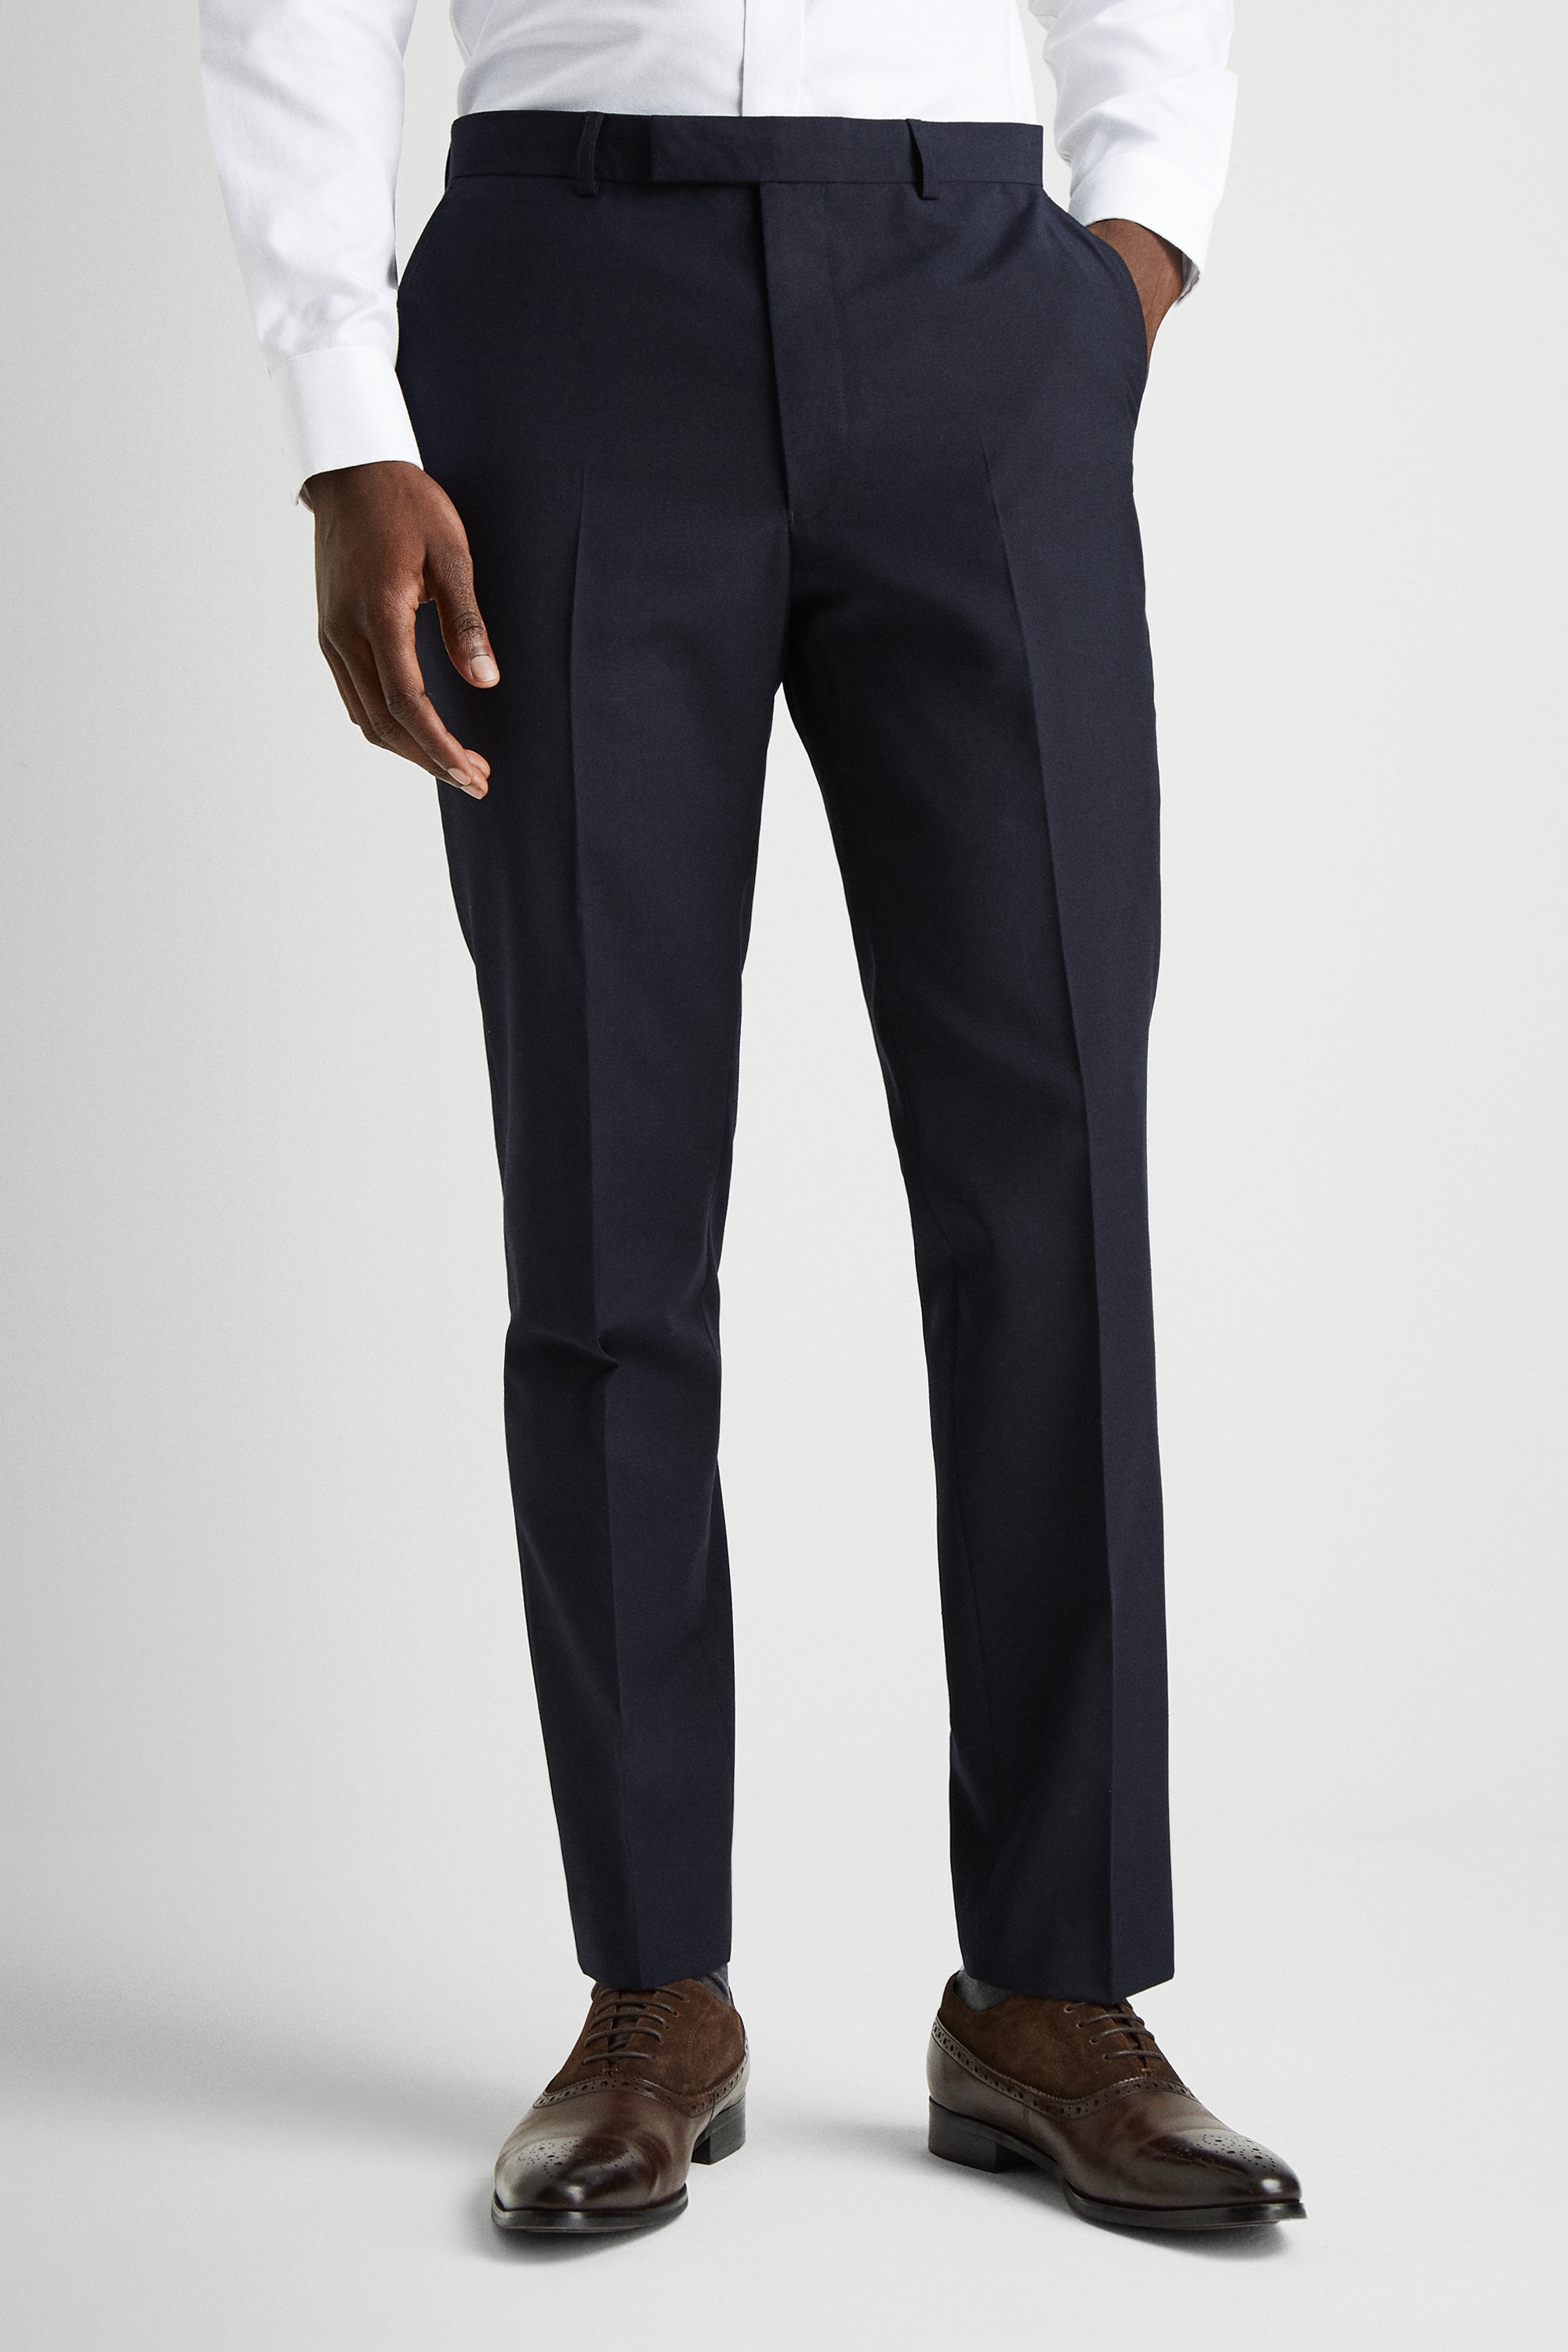 French Connection Slim Fit Navy Trousers